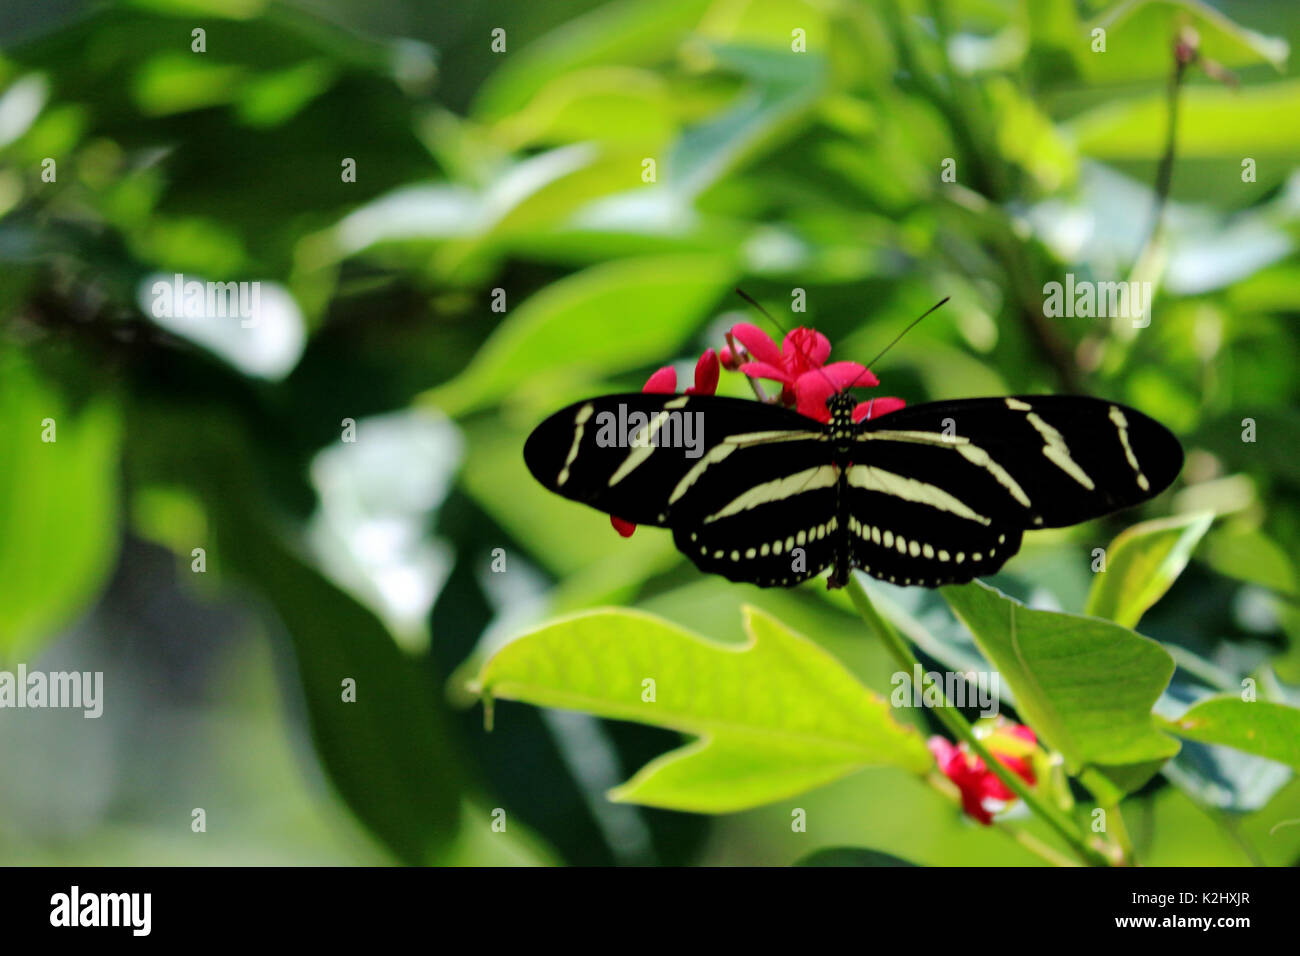 A Zebra Longwing Butterfly on Pink Flowers with a Natural Leafy Green Background Stock Photo